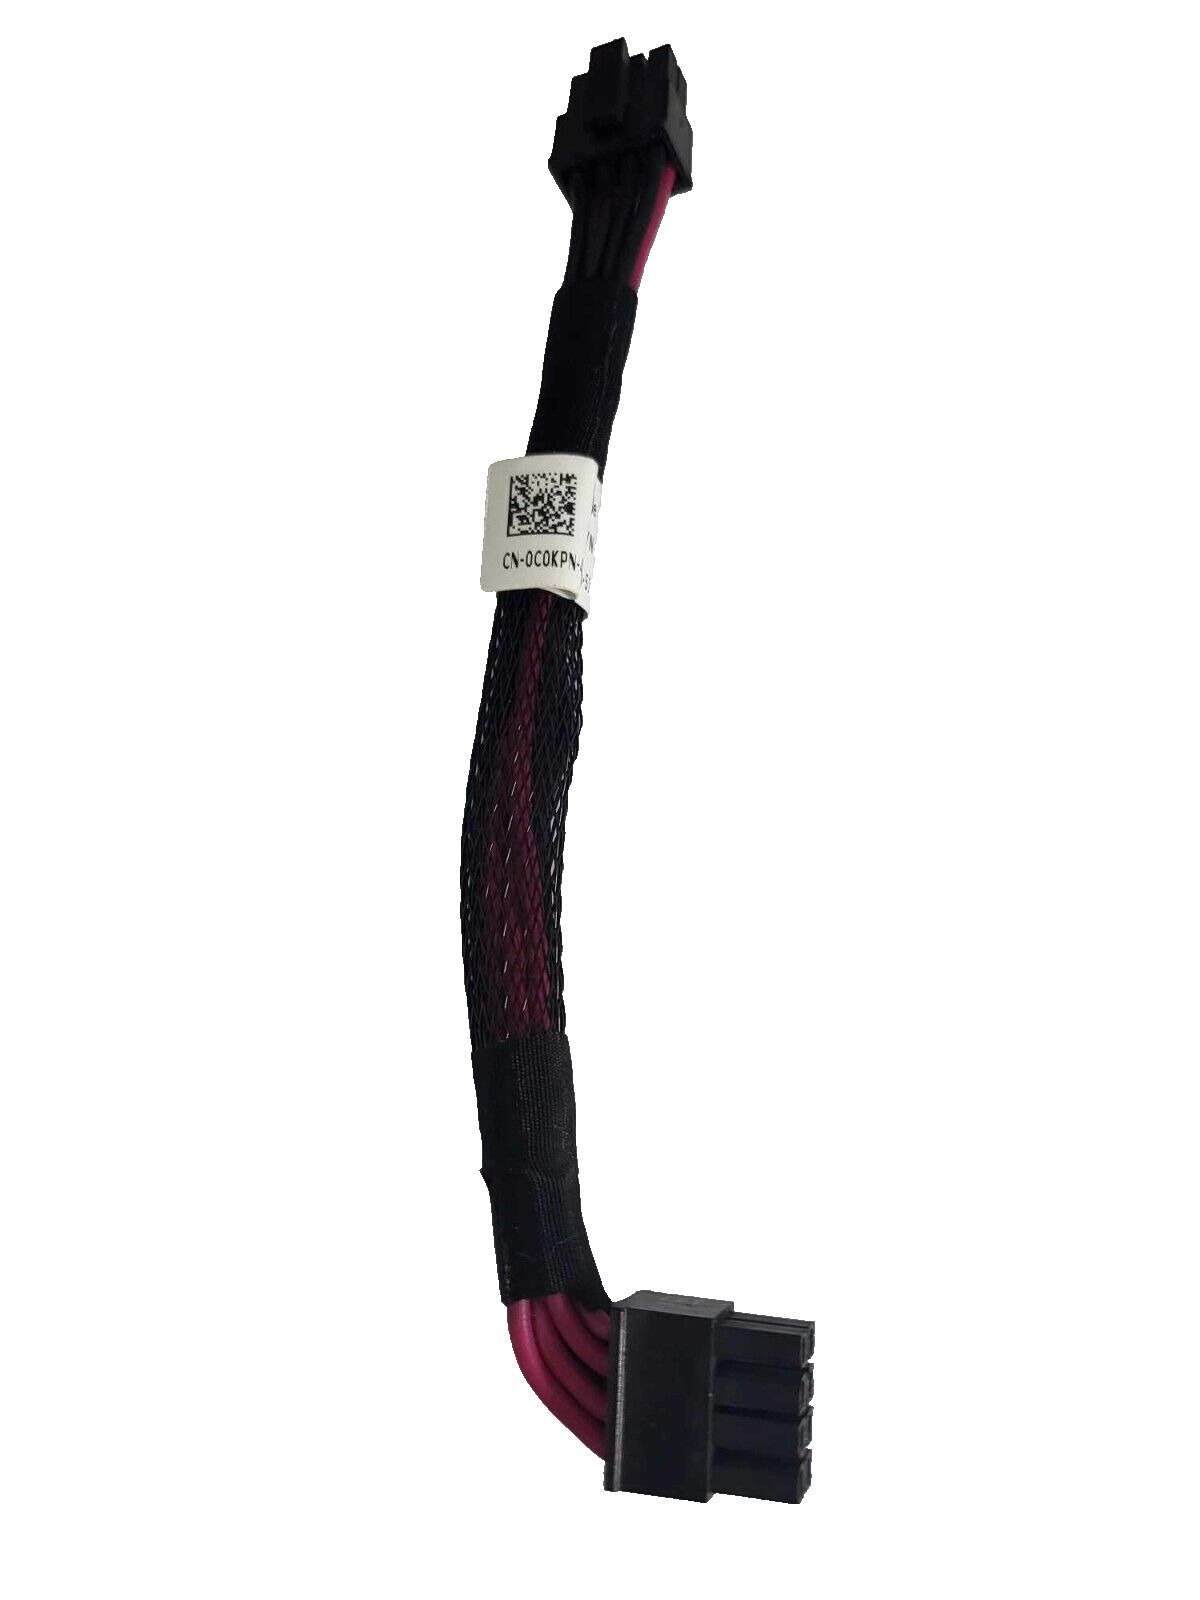 NEW DELL HDD BACKPLANE POWER CABLE FOR POWEREDGE FC830 - 8 PIN 4.5 INCH C0KPN